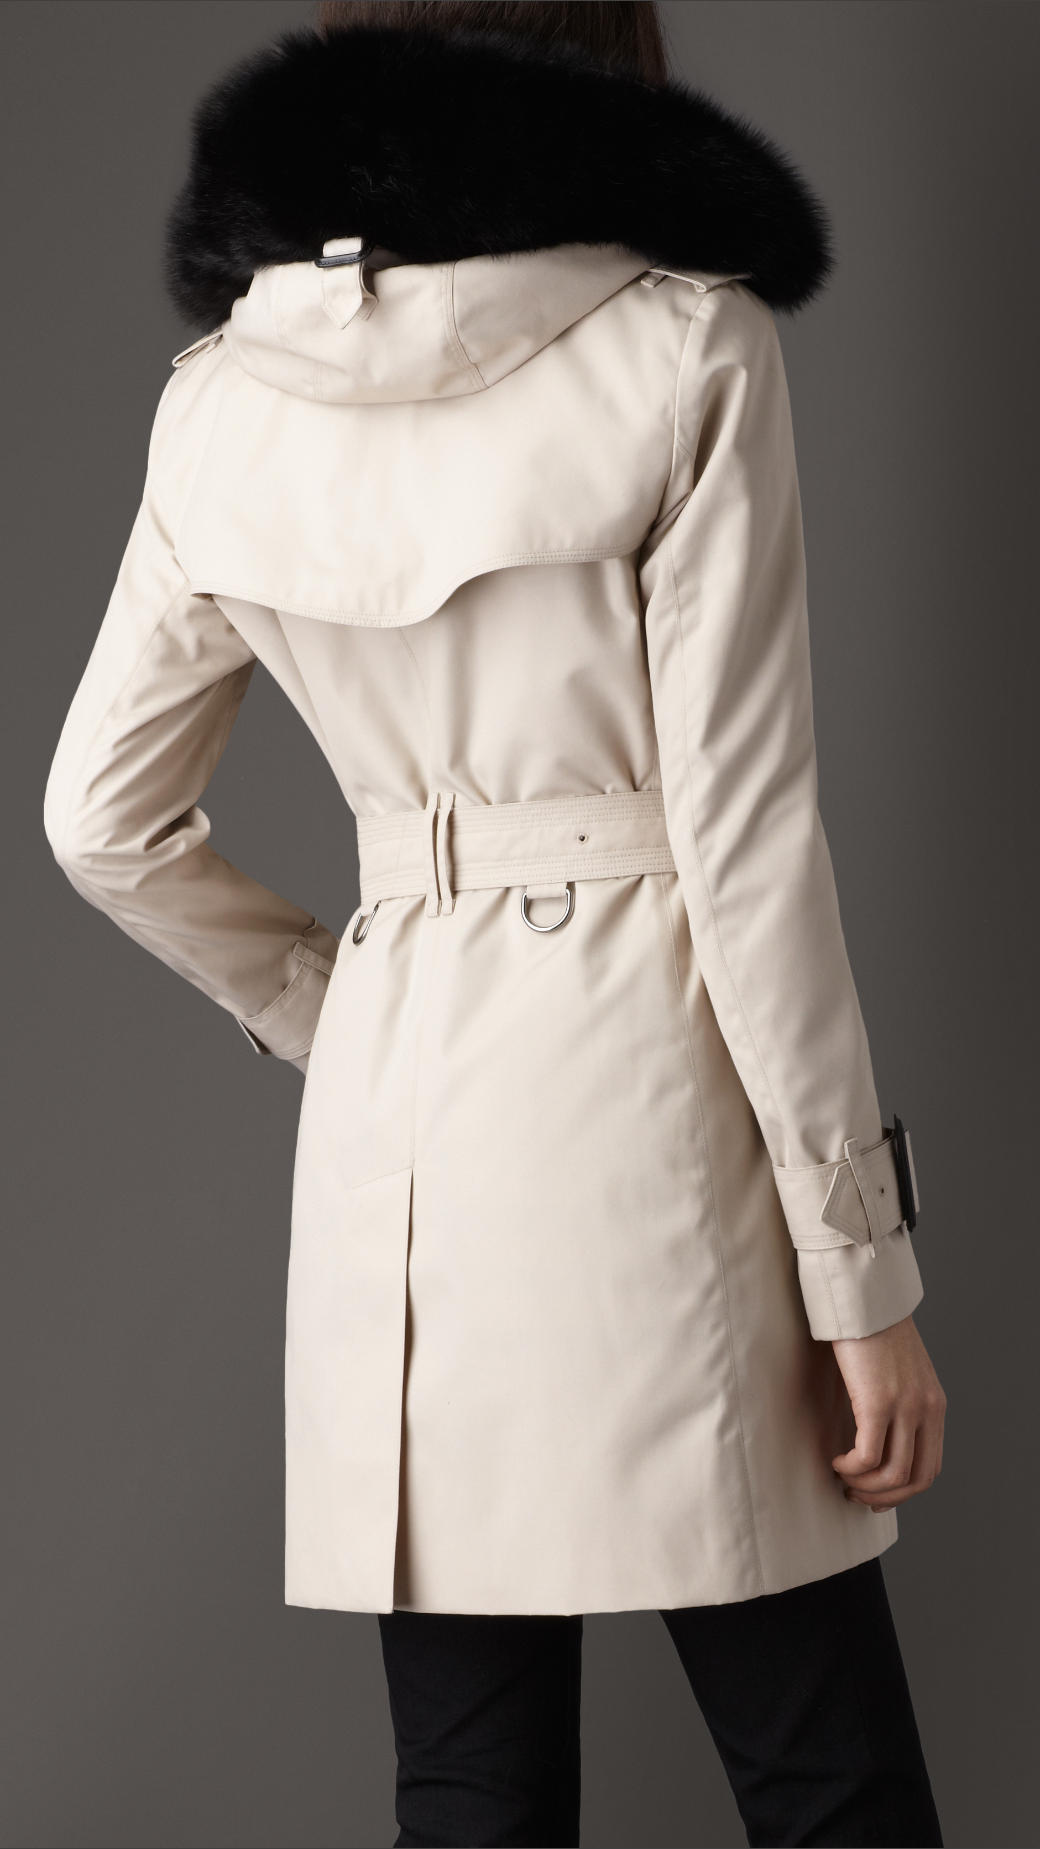 Lyst - Burberry Mid-Length Hooded Cotton Poplin Trench Coat in Natural